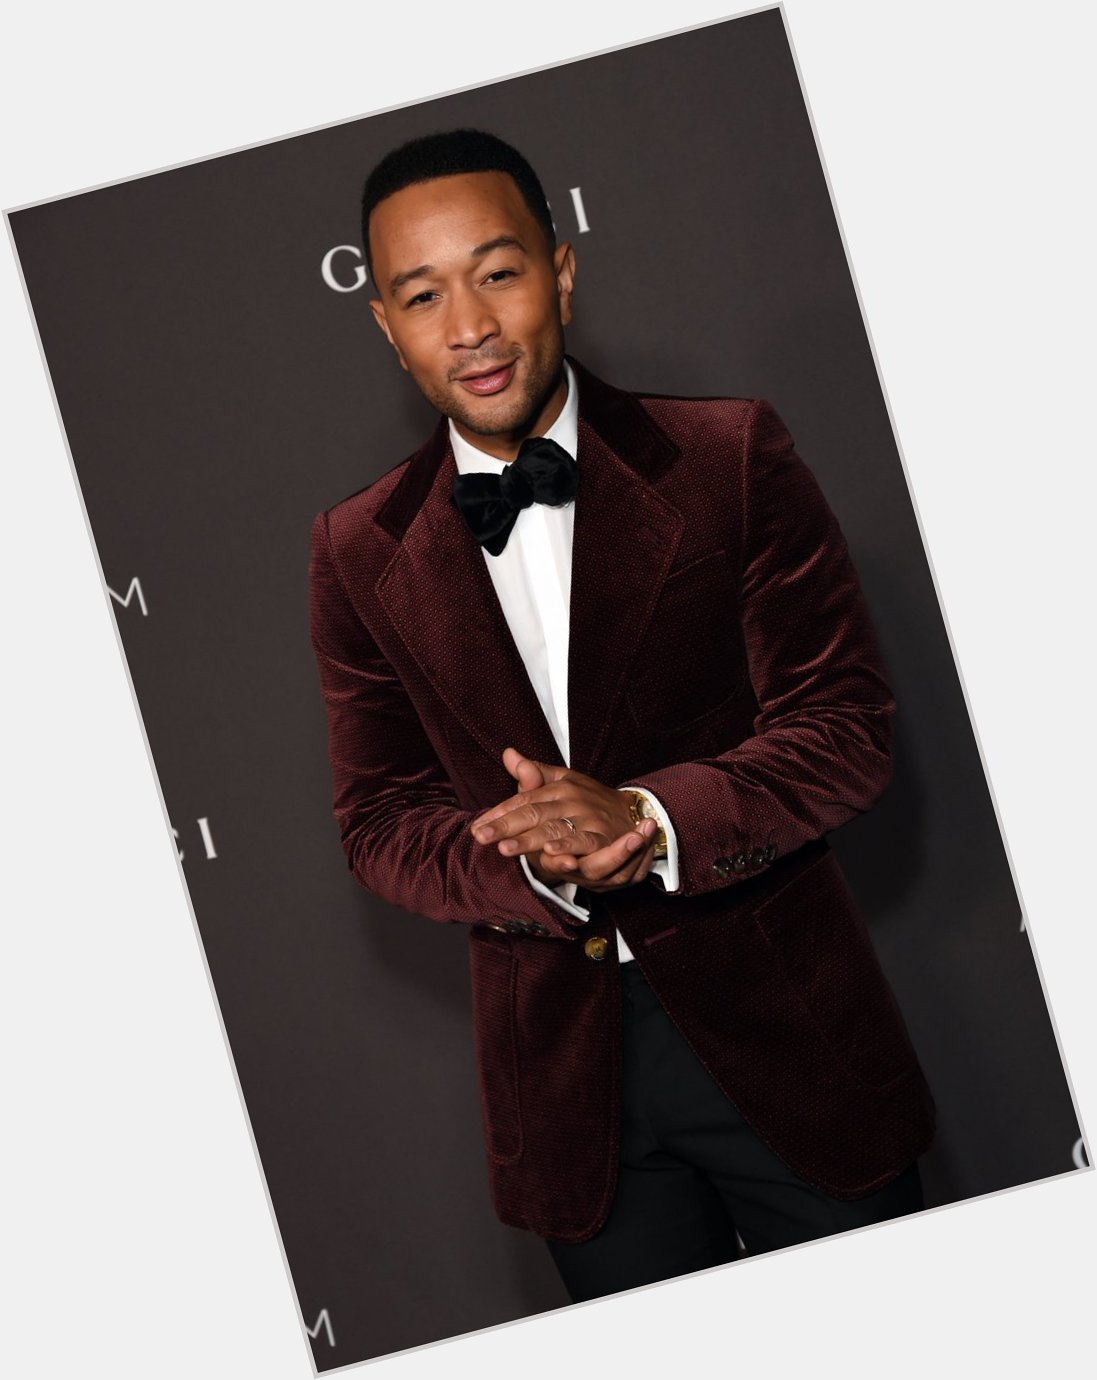 Happy Birthday  What are your top 5 songs by John Legend?  